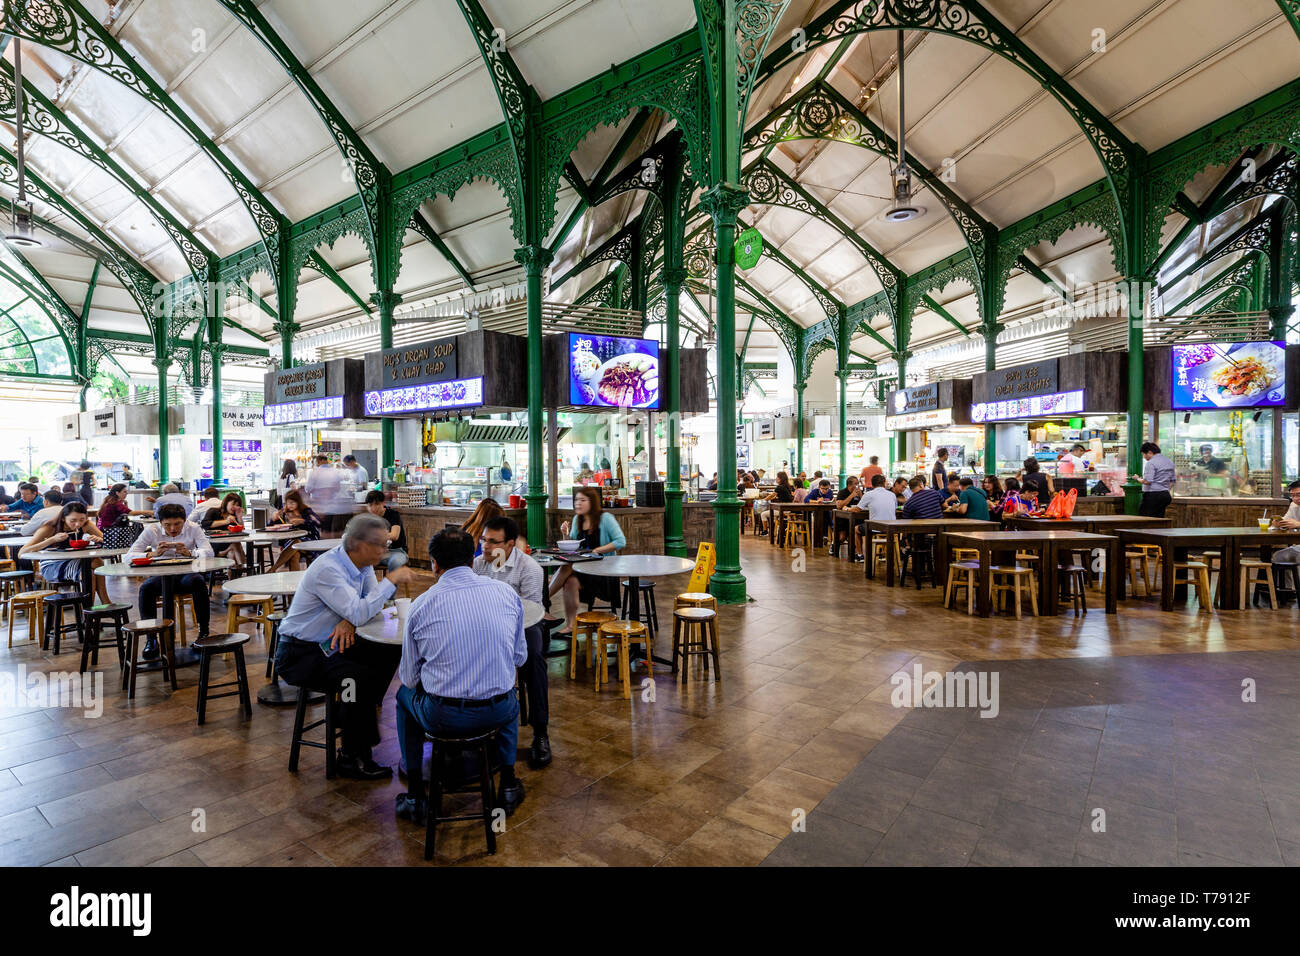 People Eating Lunchtime Food At The Lau Pa Sat Festival Market, Singapore, South East Asia Stock Photo